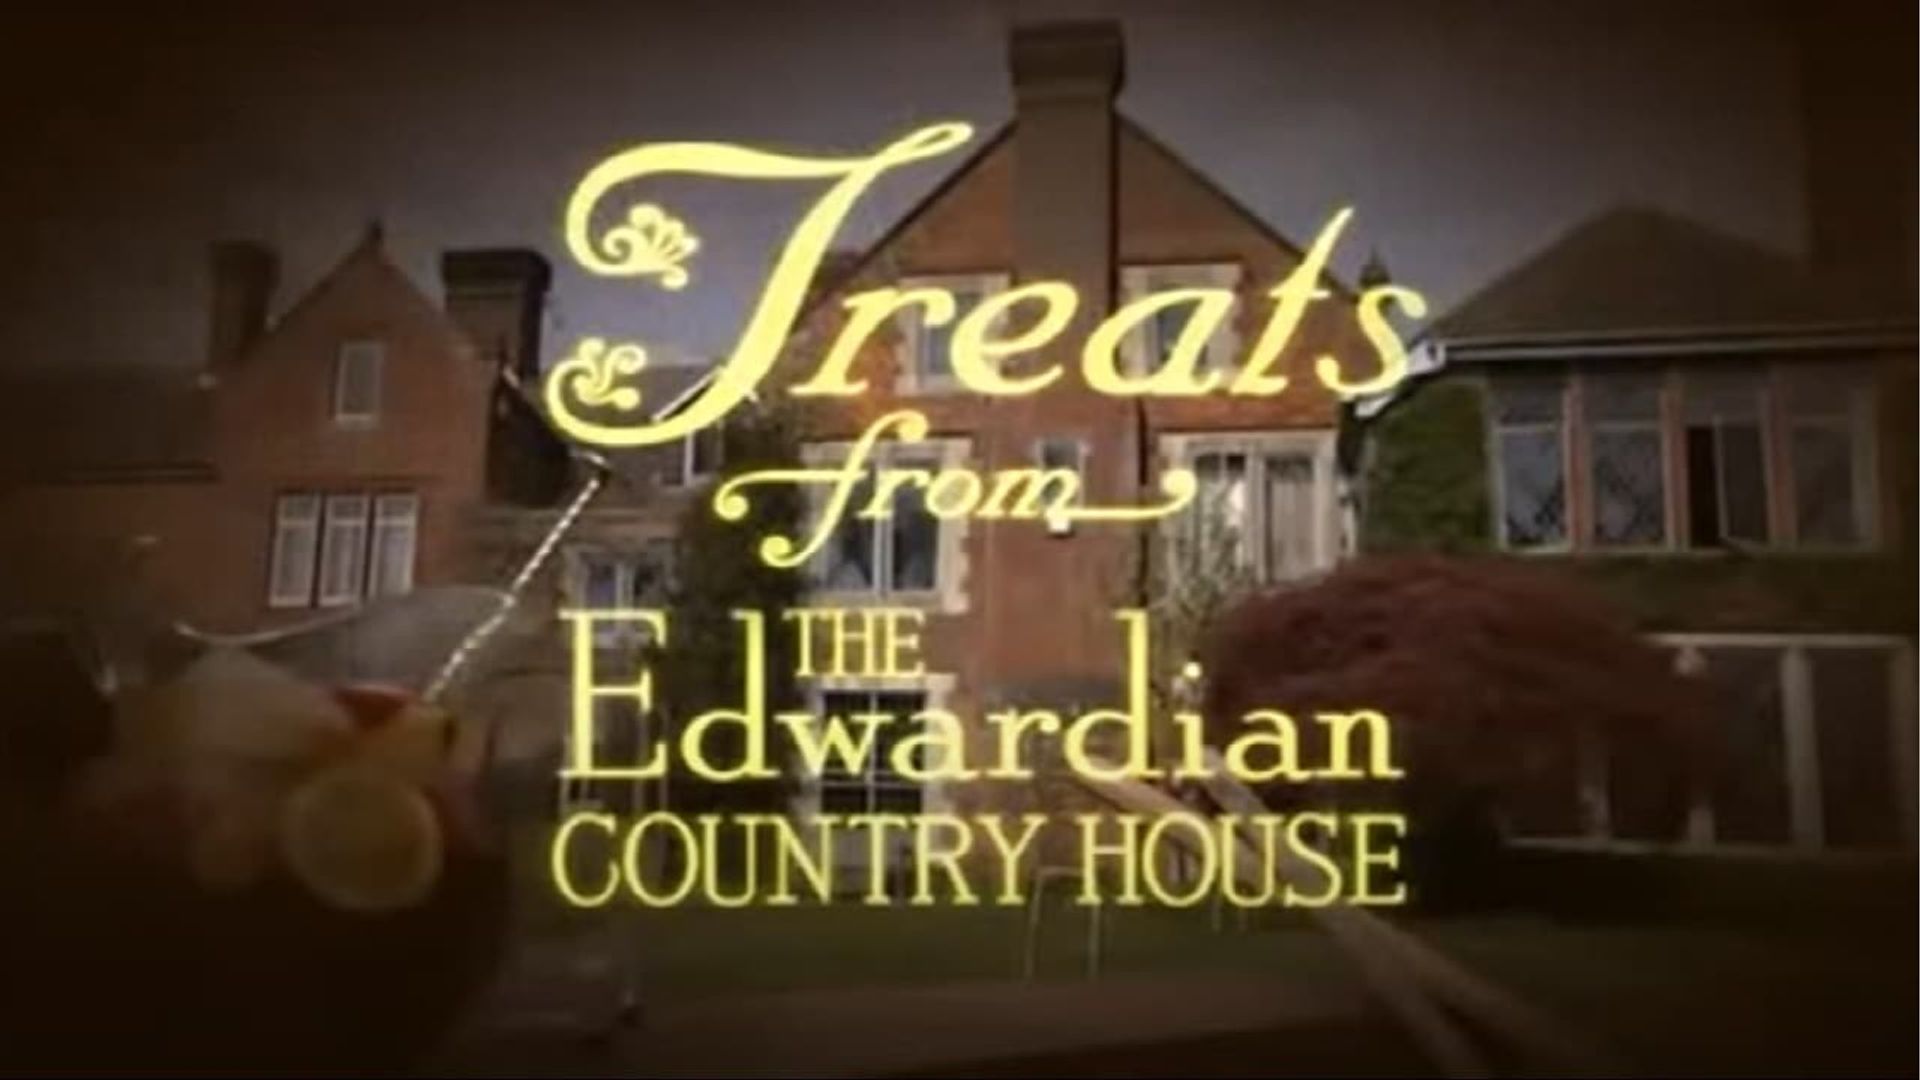 Treats from the Edwardian Country House background